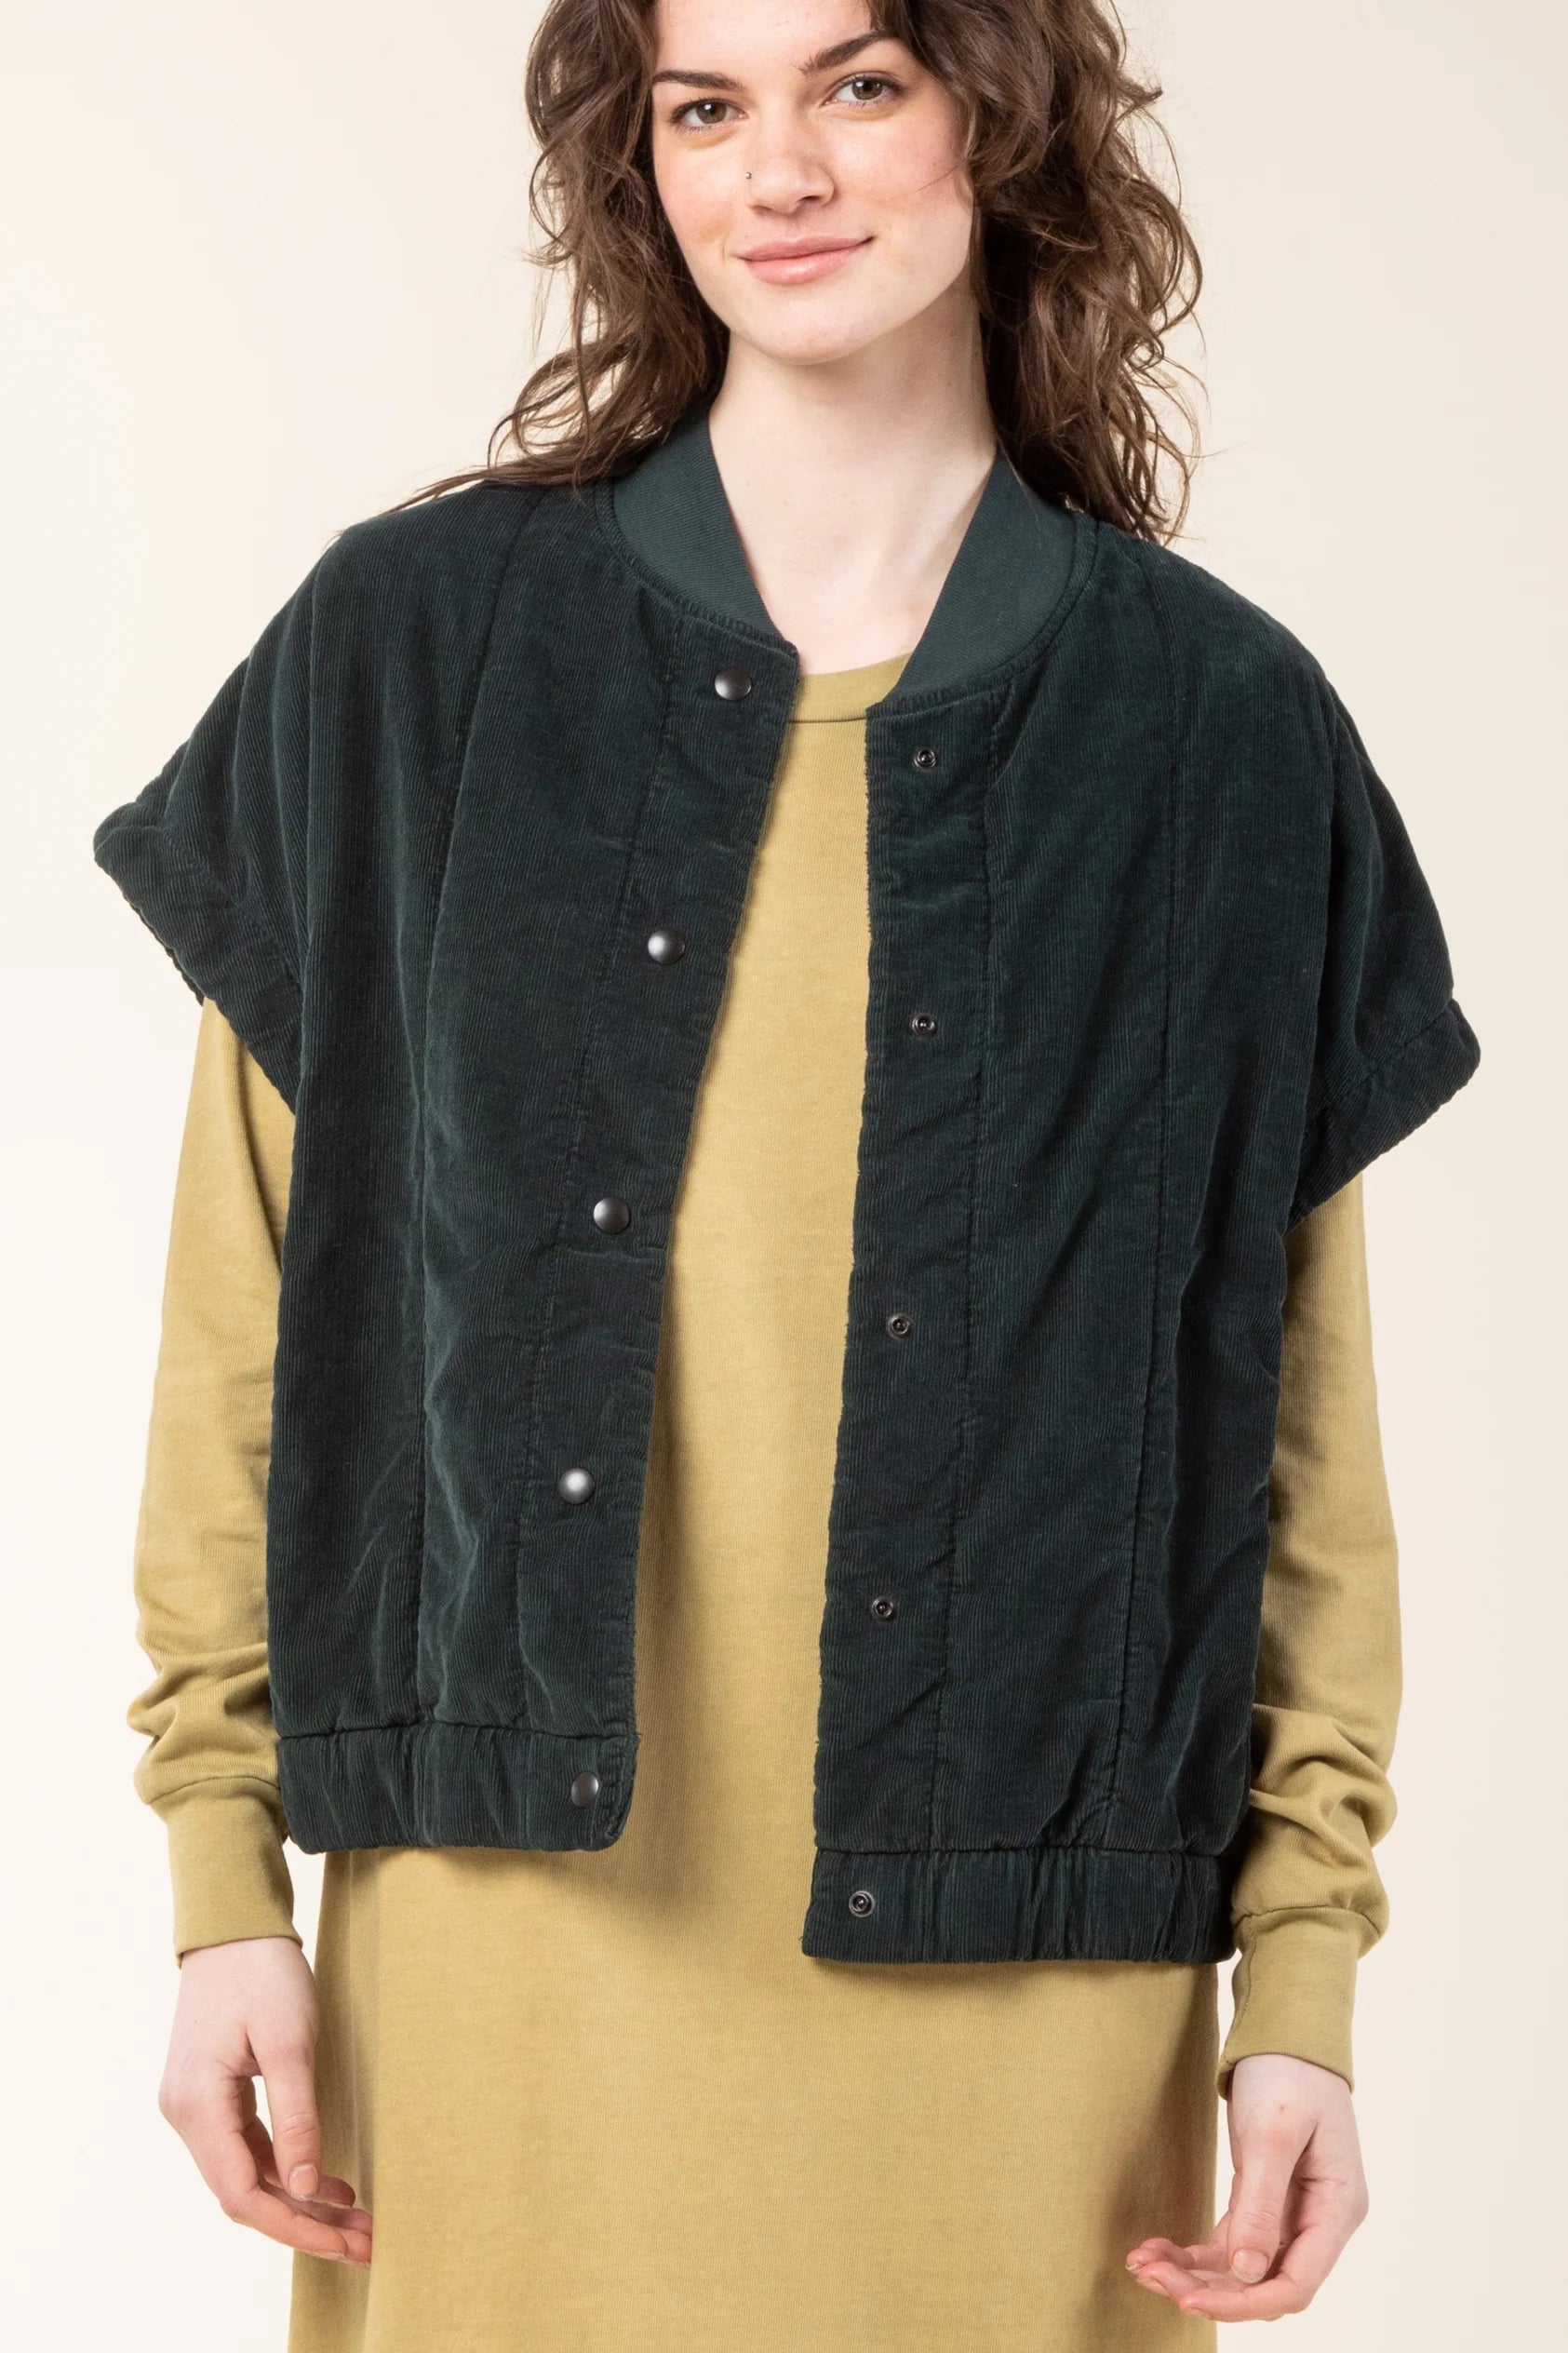 PRAIRIE UNDERGROUND _ Made in USA Sustainable Clothing Collections - COLT Corduroy Snap Front Vest in Galaxy Green